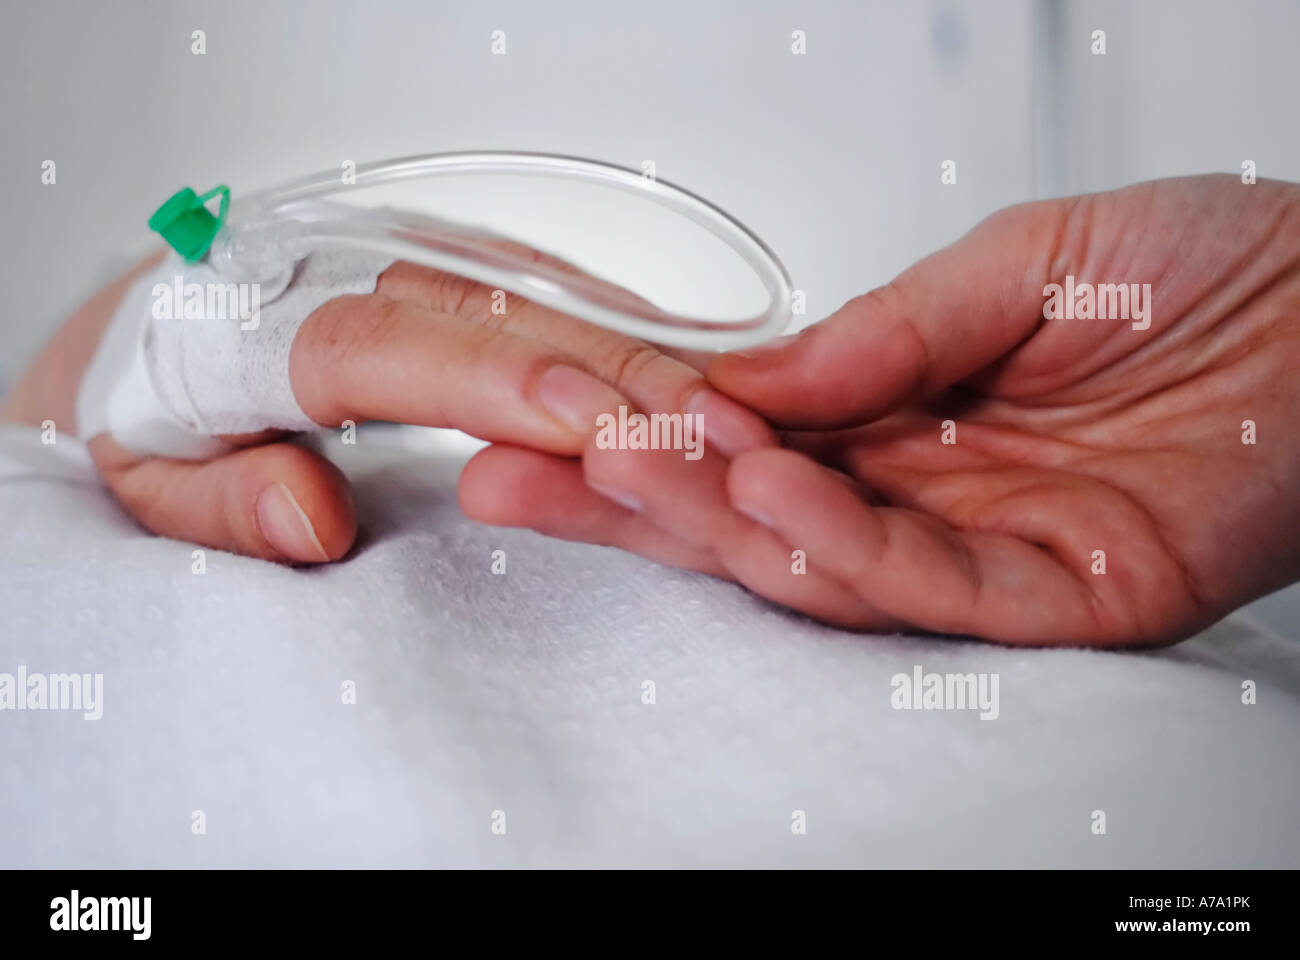 Holding a patient's hand with iv drip at bedside Stock Photo